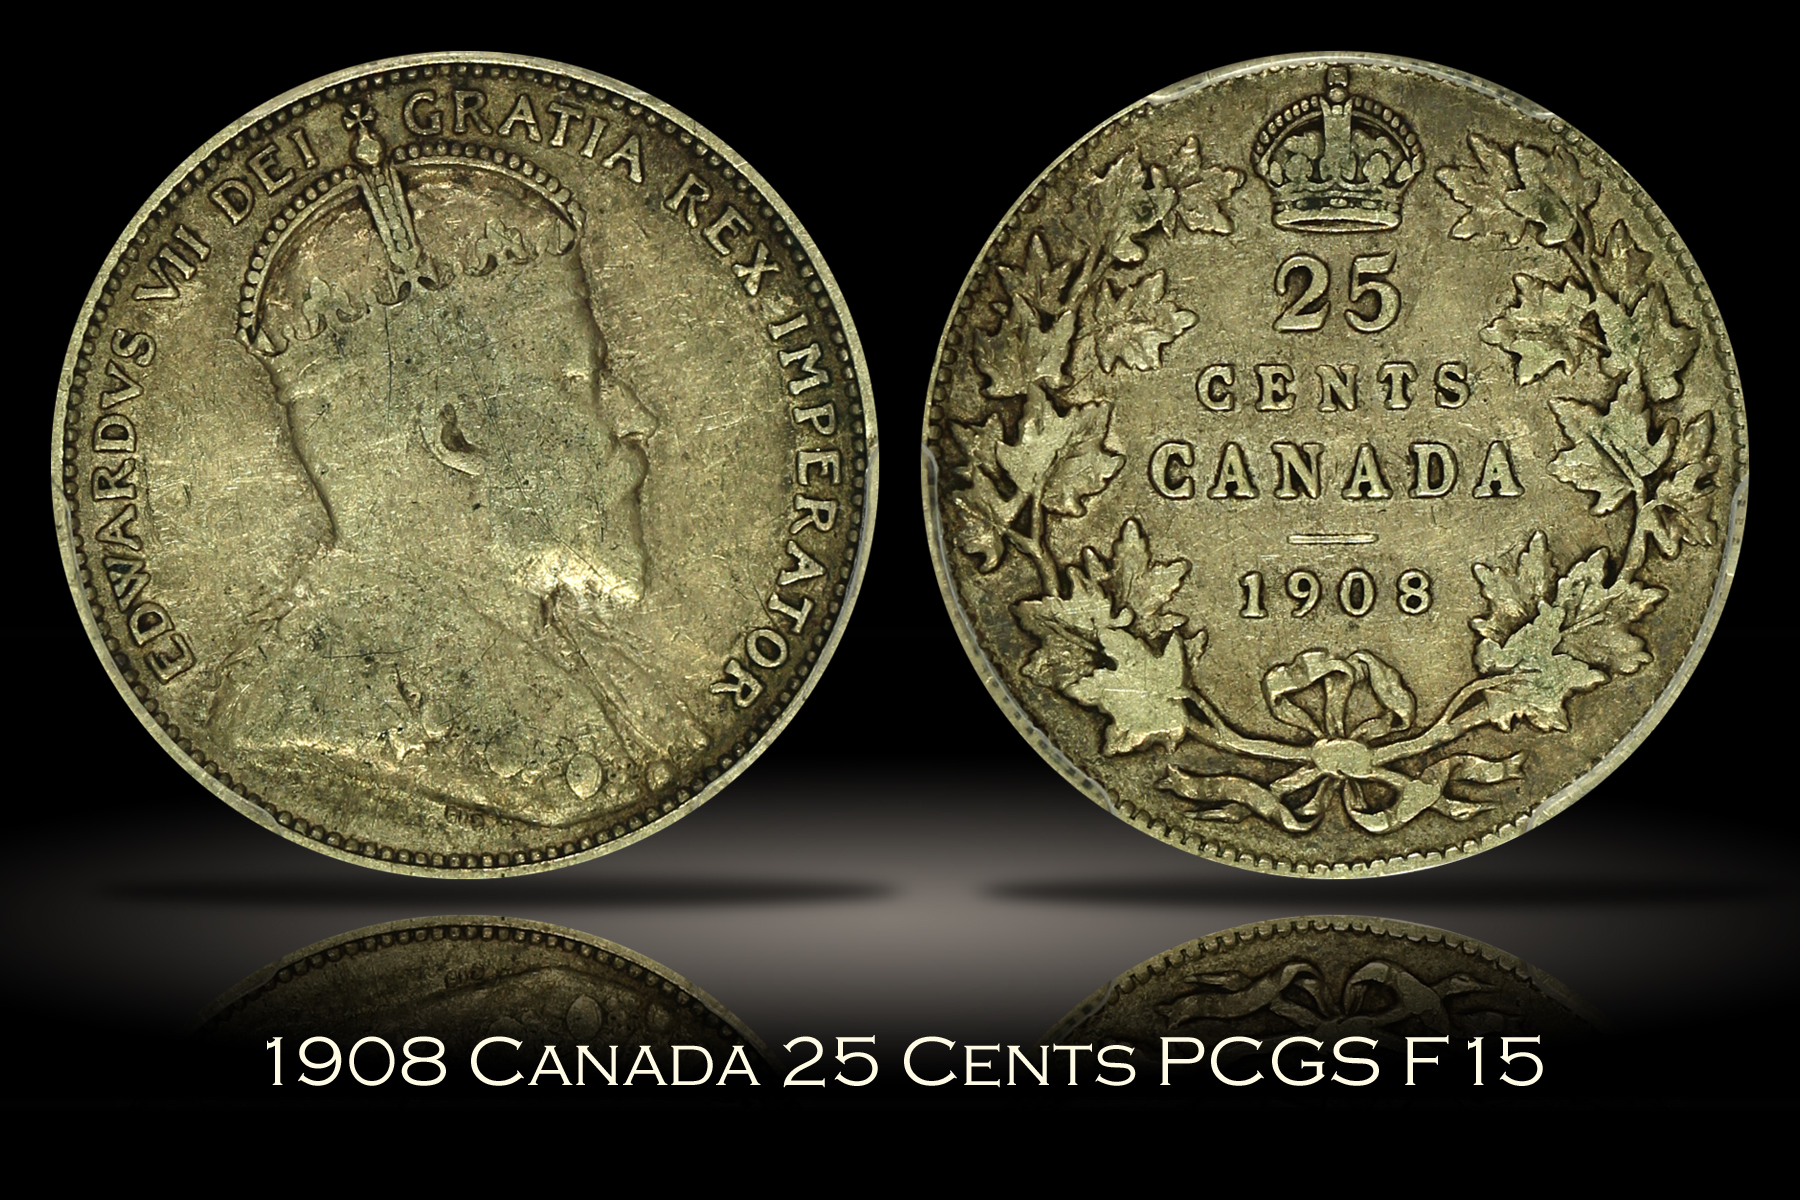 1908 Canada 25 Cents PCGS F15